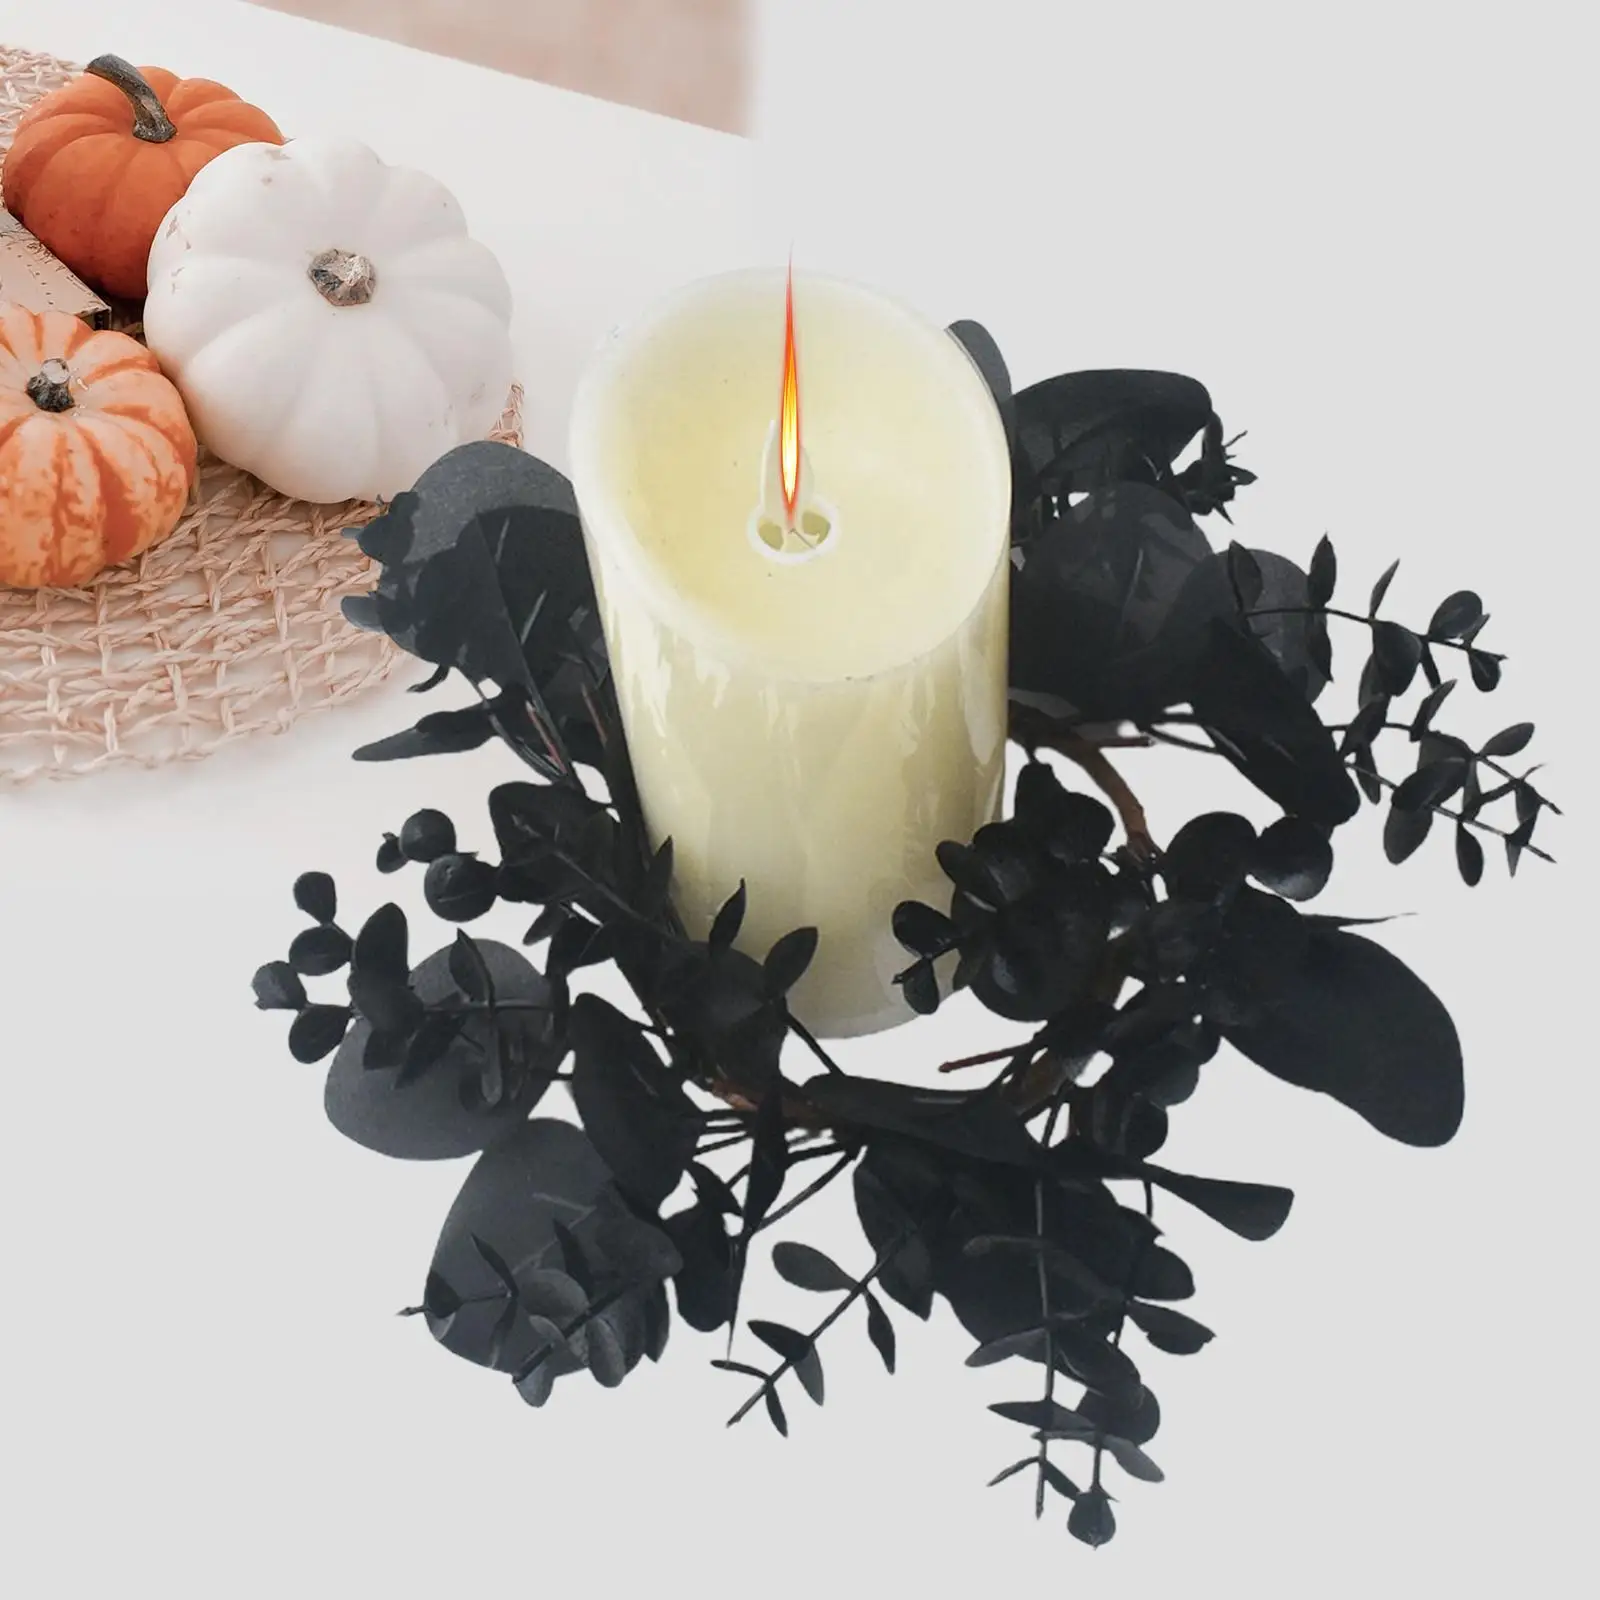 Candle Holder Decorative Rings Tabletop Candlestick Holder Candle Rings Wreaths Halloween for Party Dining Room Farmhouse Fence